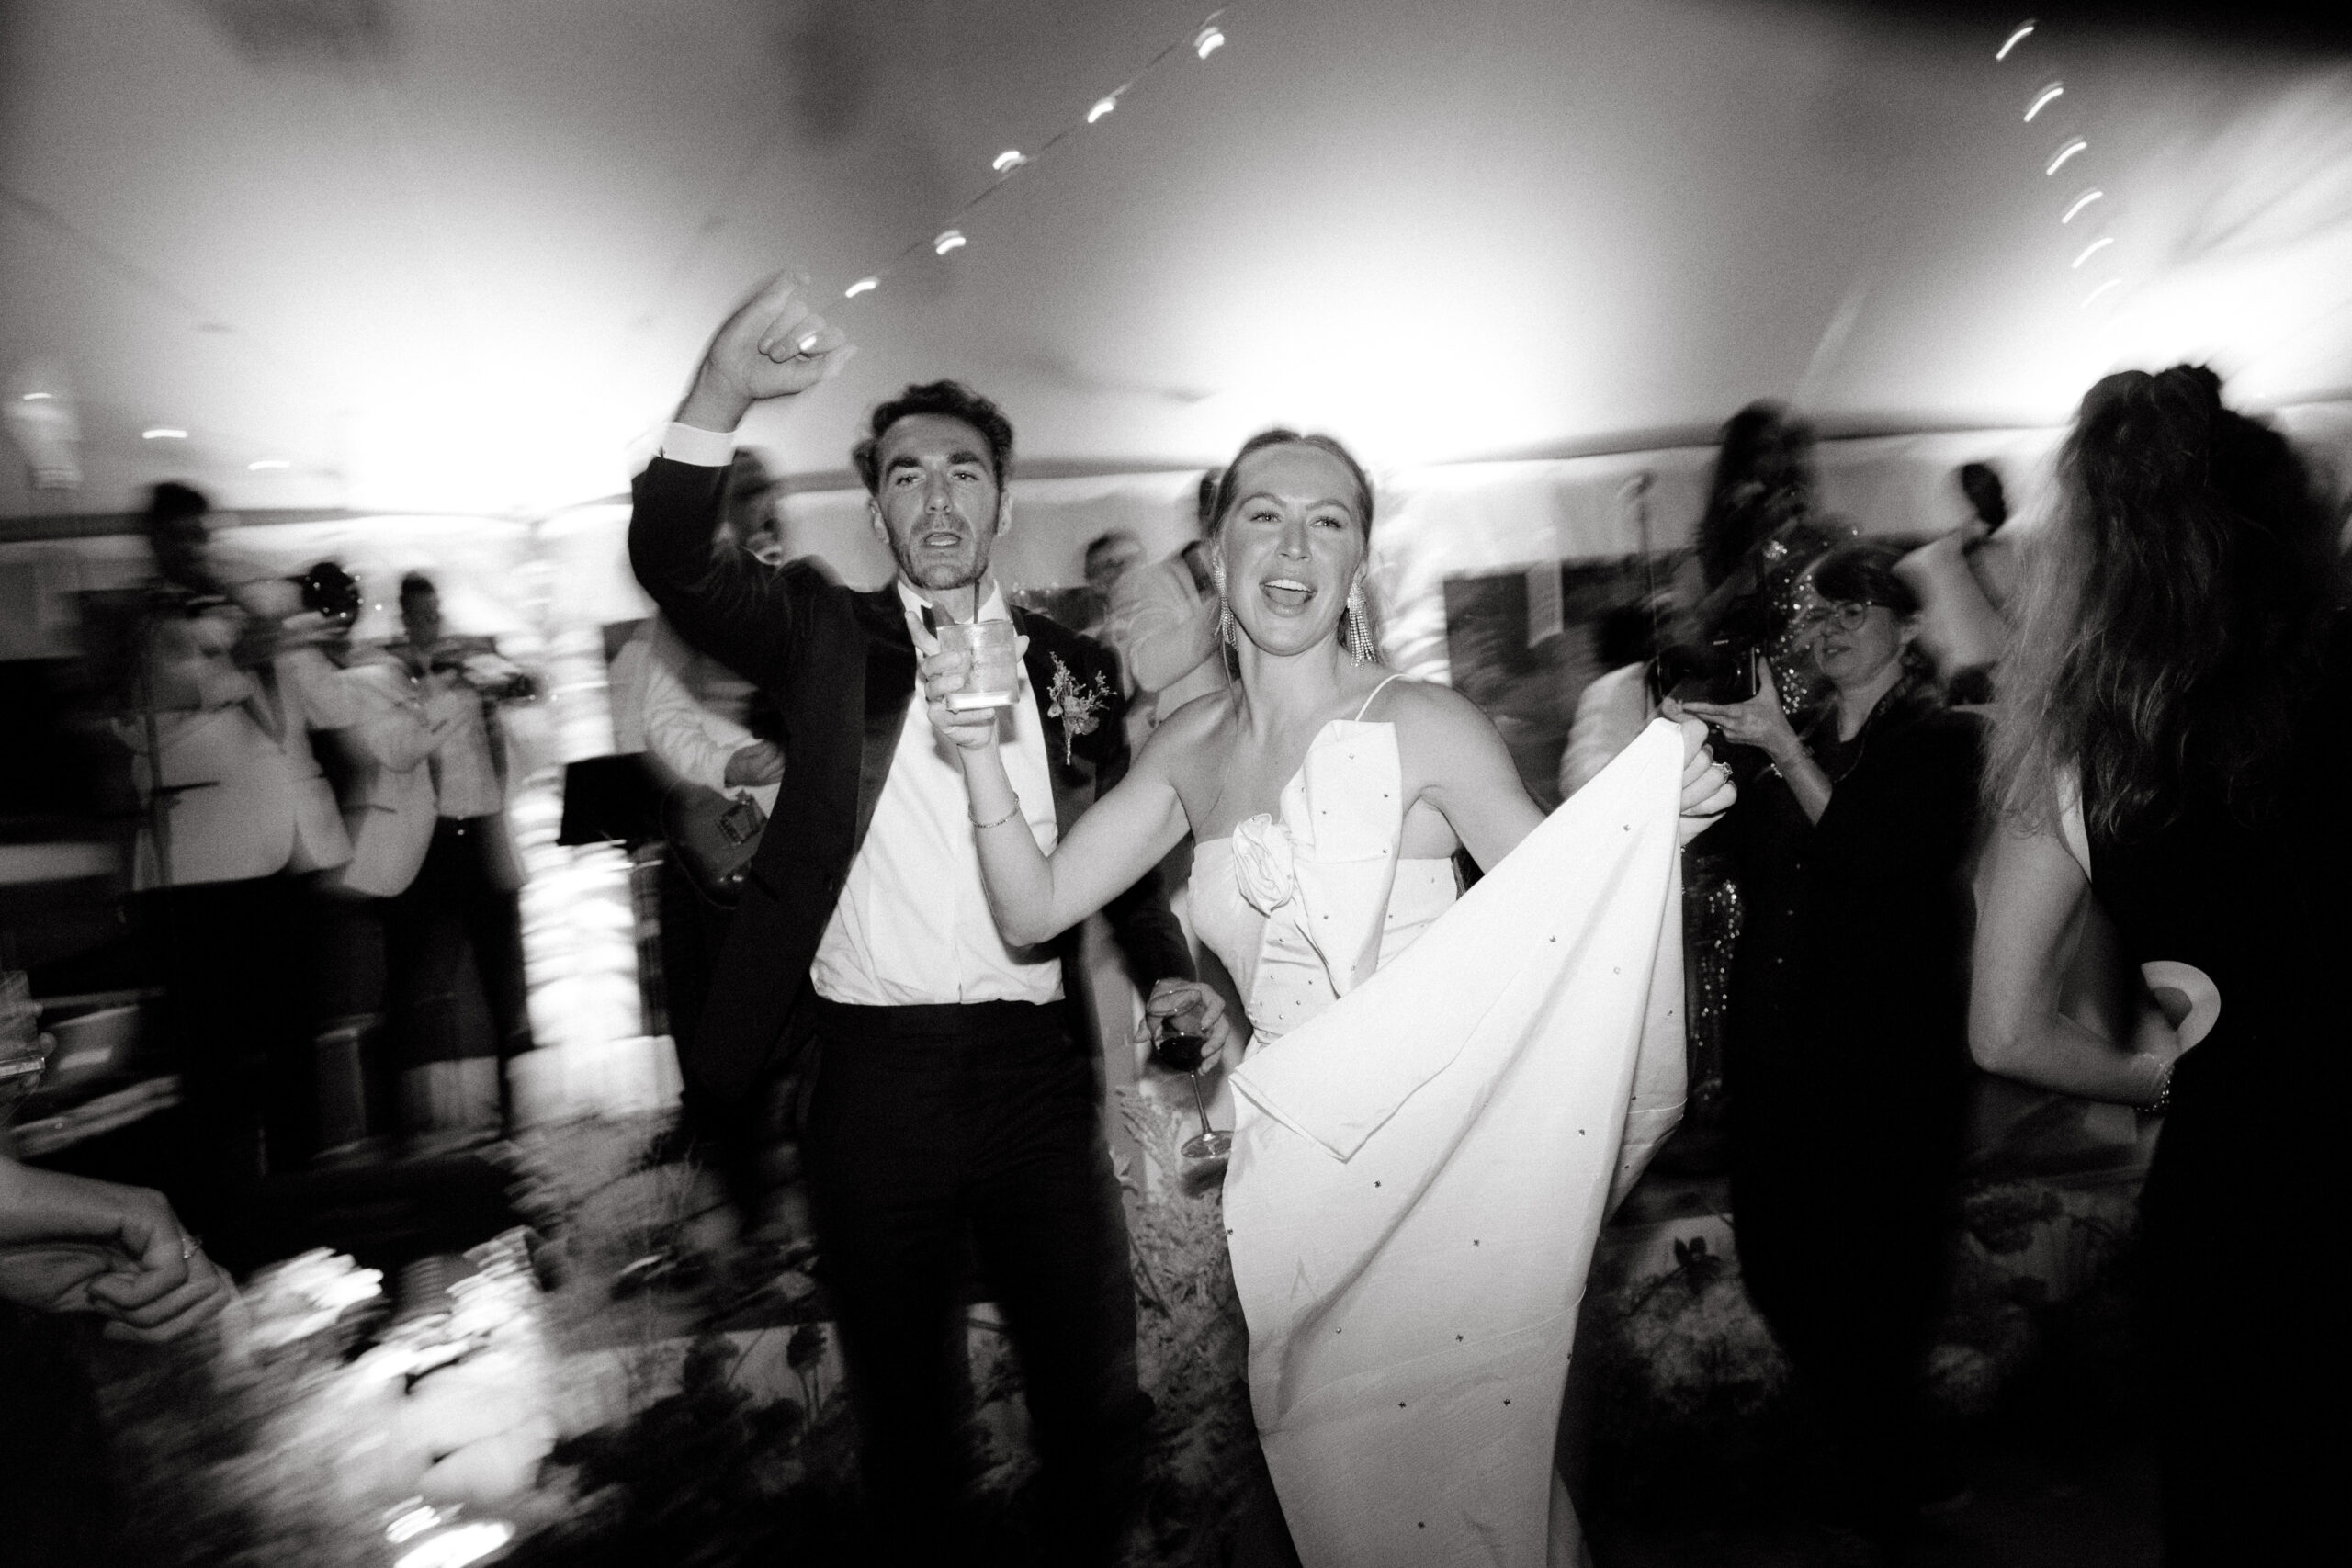 Candid photo of the bride and groom while in the dance froo